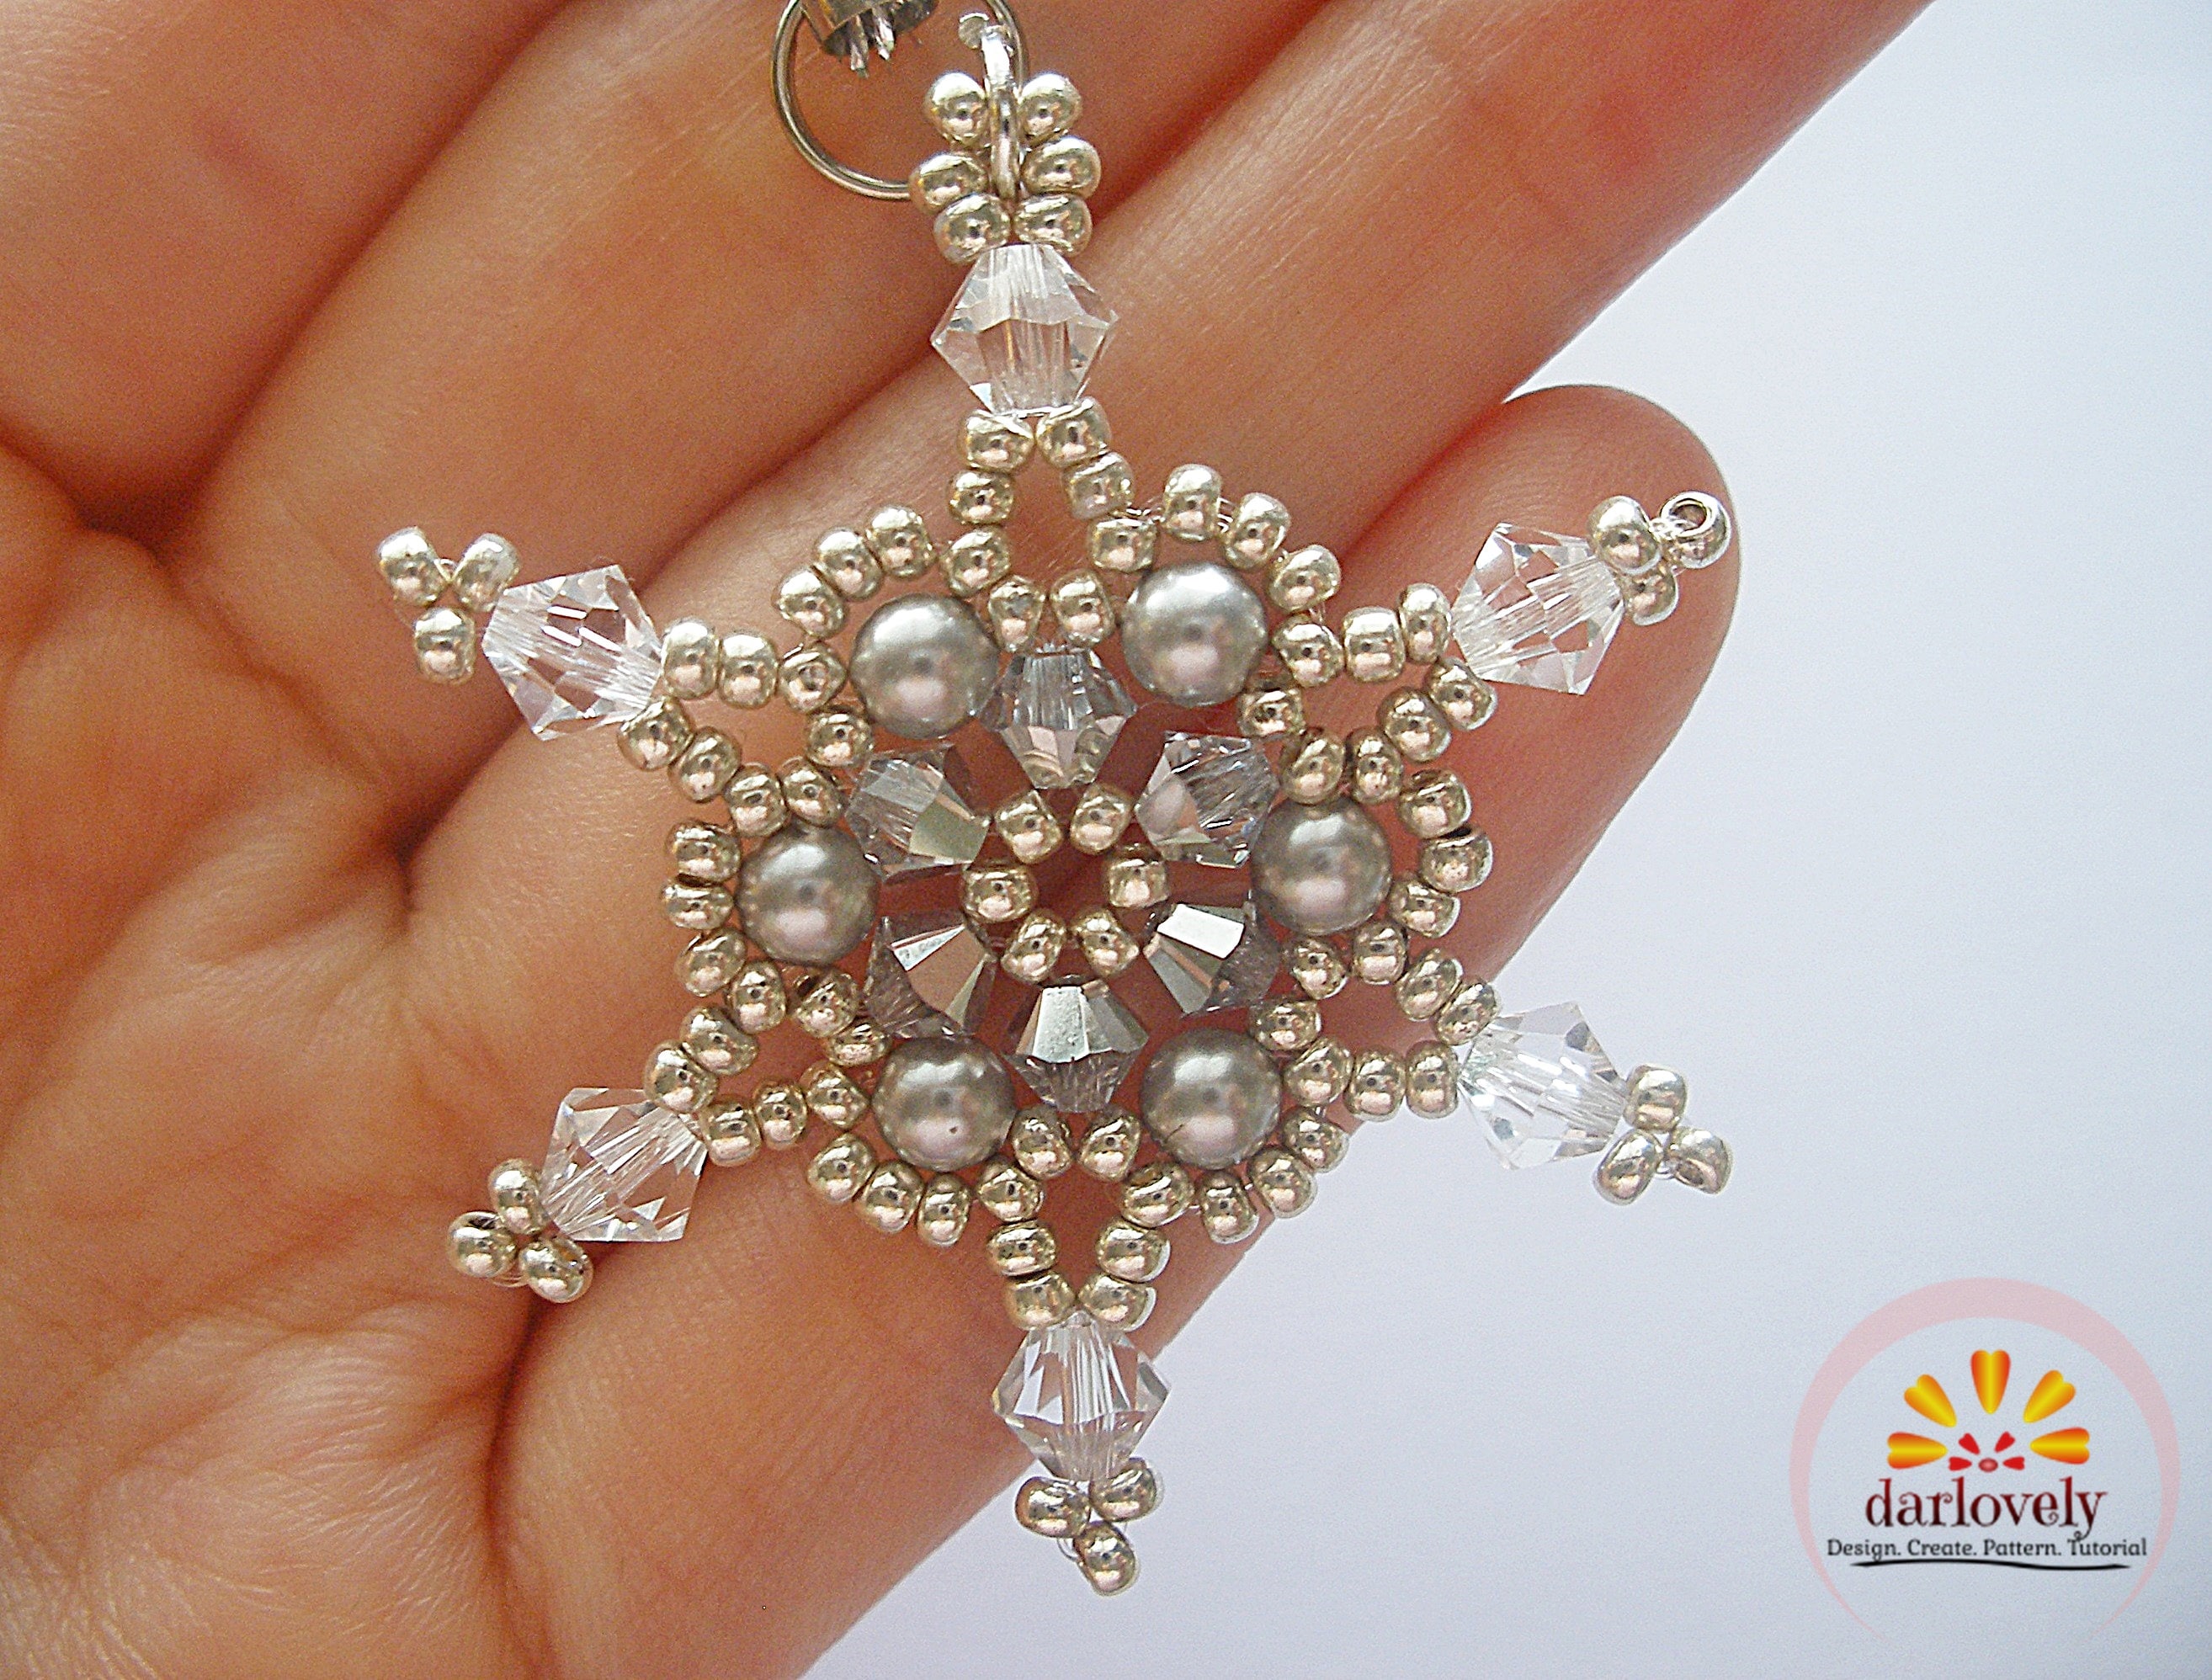 How to Make Beaded Snowflake Ornaments for Christmas + Video